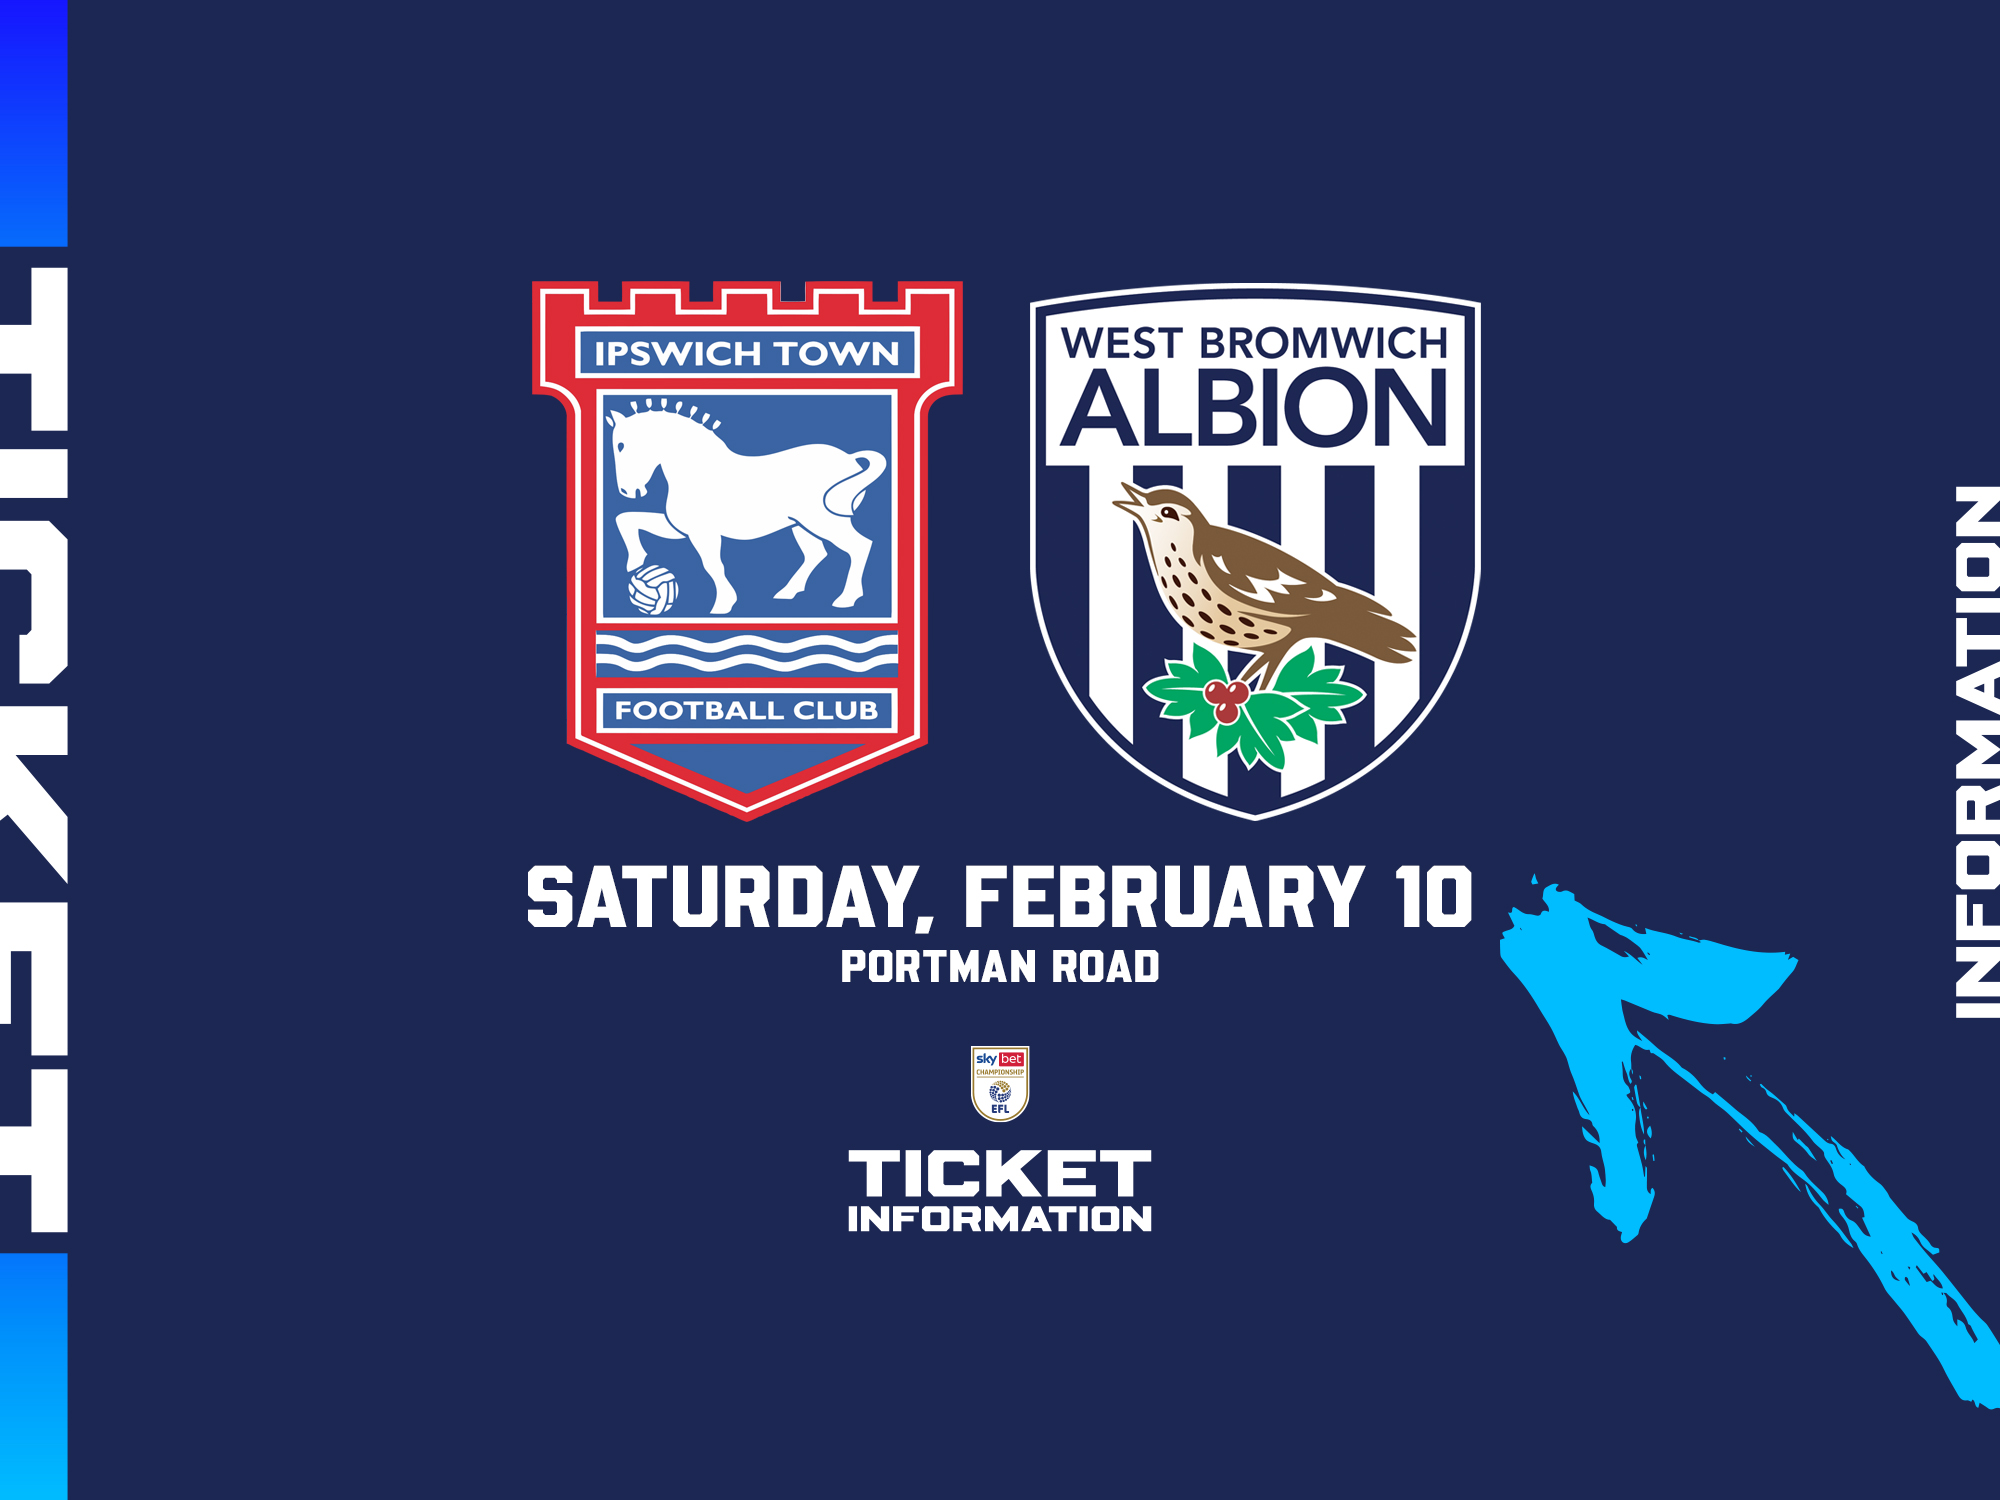 A ticket graphic displaying information for Albion's game at Ipswich